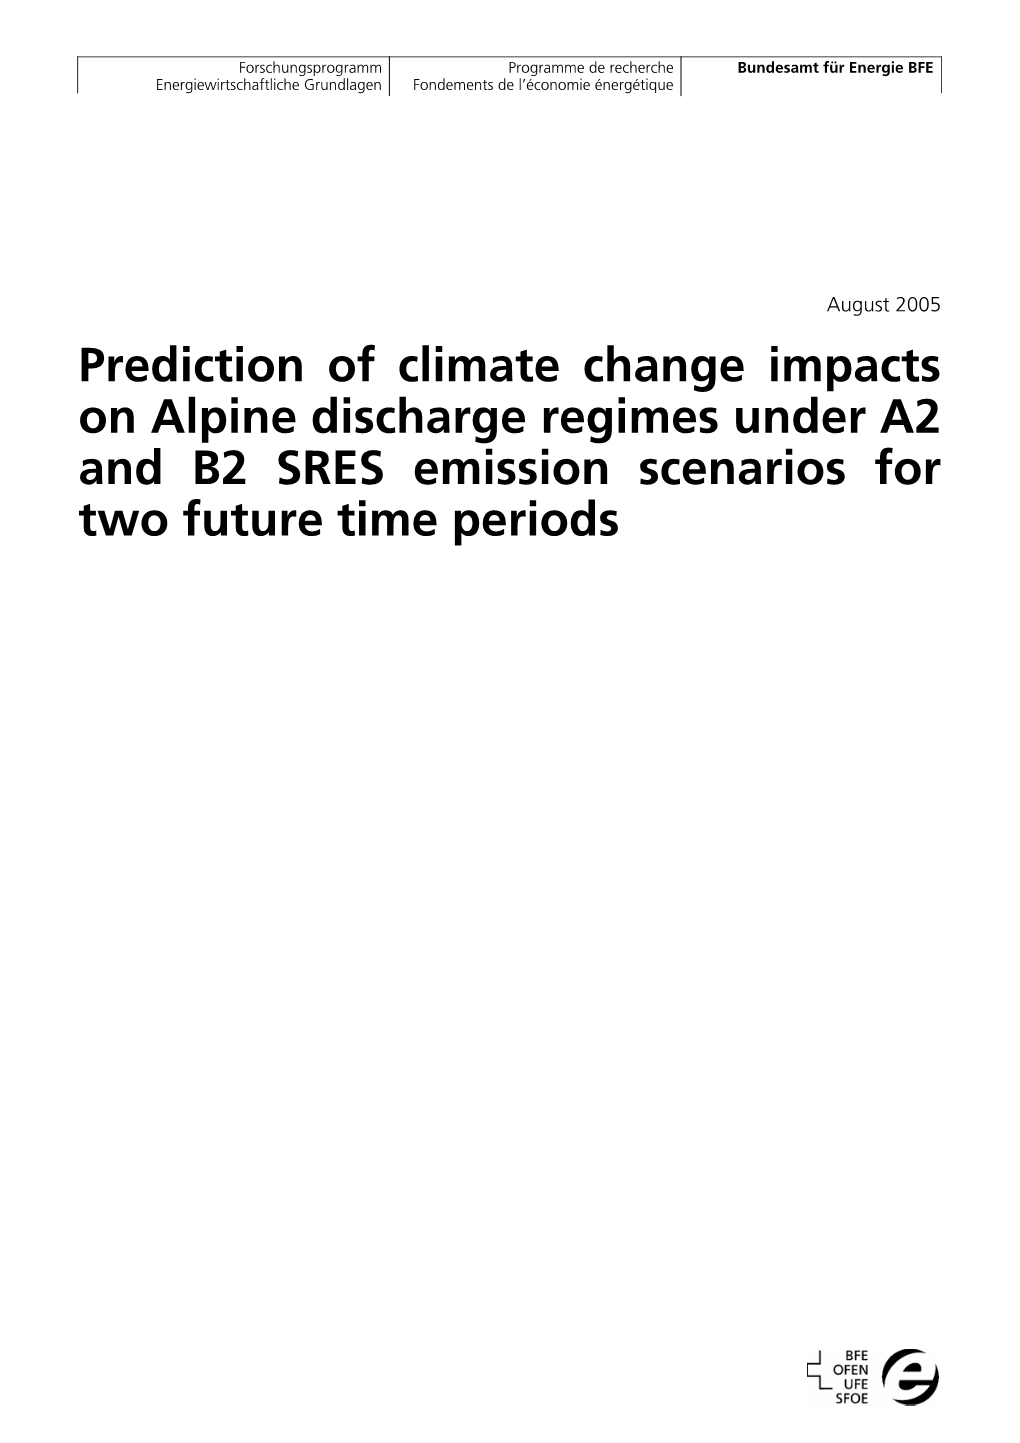 Prediction of Climate Change Impacts on Alpine Discharge Regimes Under A2 and B2 SRES Emission Scenarios for Two Future Time Periods